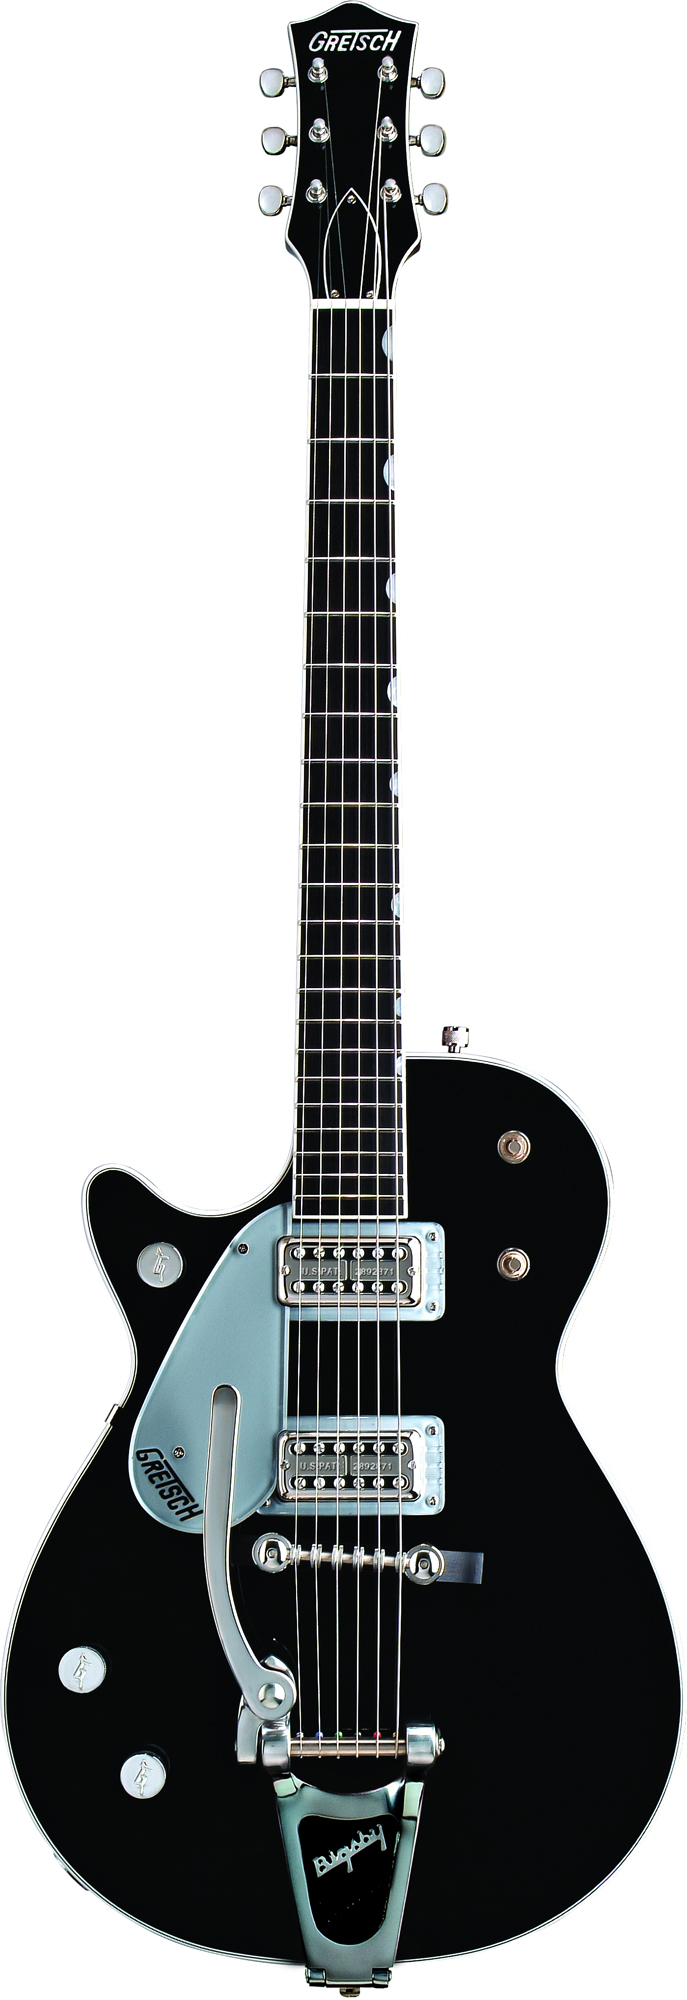 G6128TLH Duo Jet Bigsby Left Handed